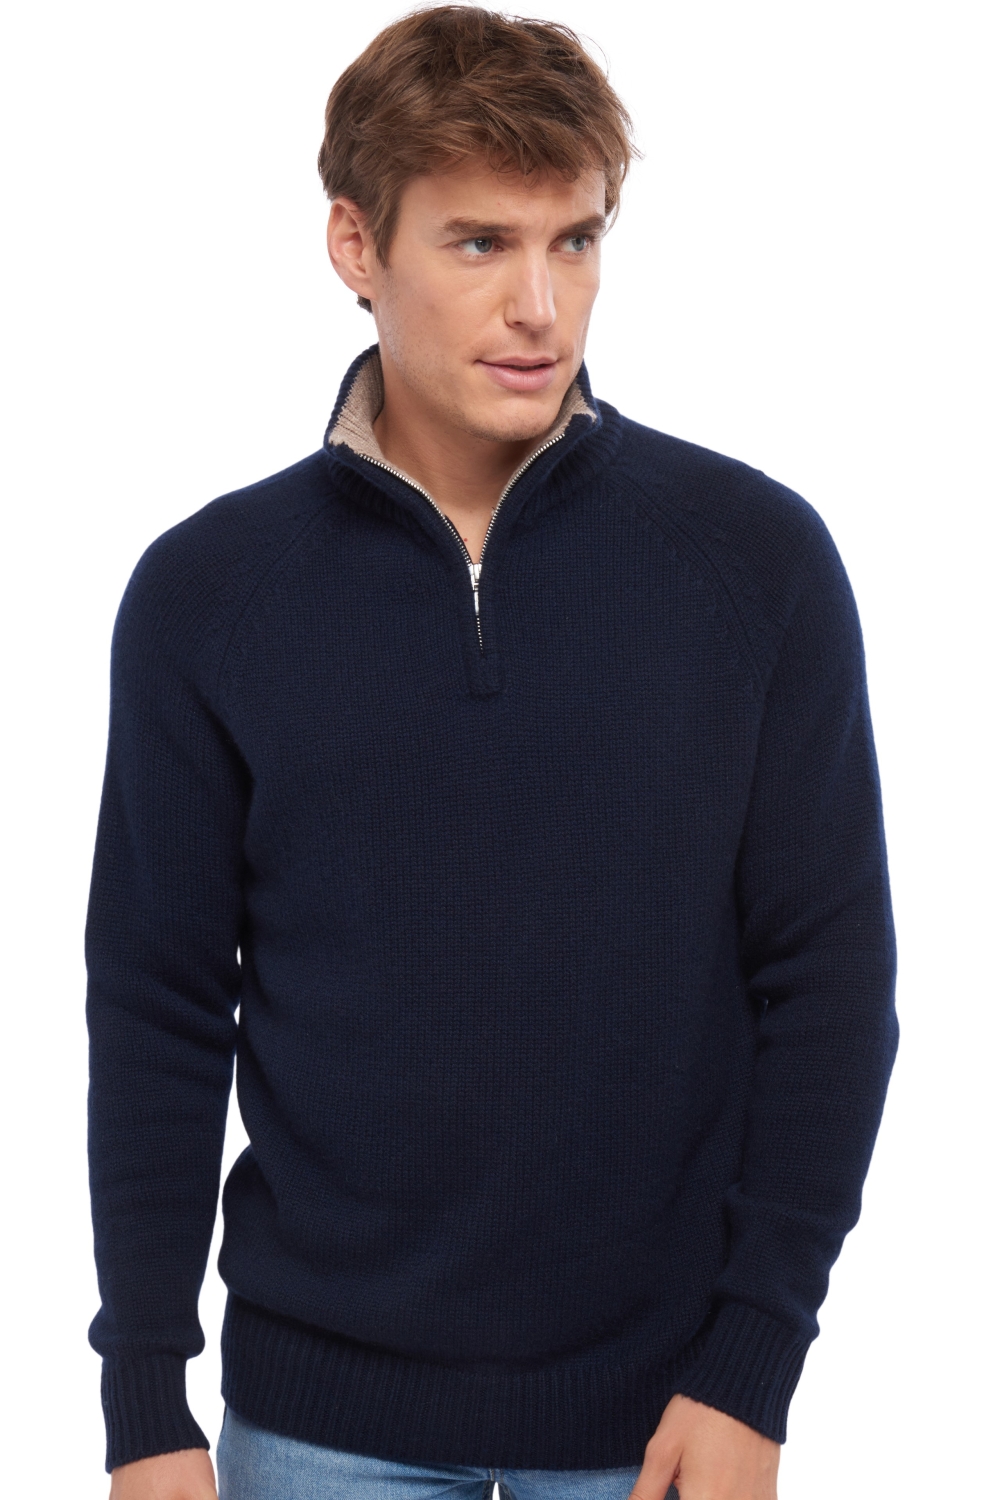 Cachemire pull homme epais angers marine fonce toast 3xl